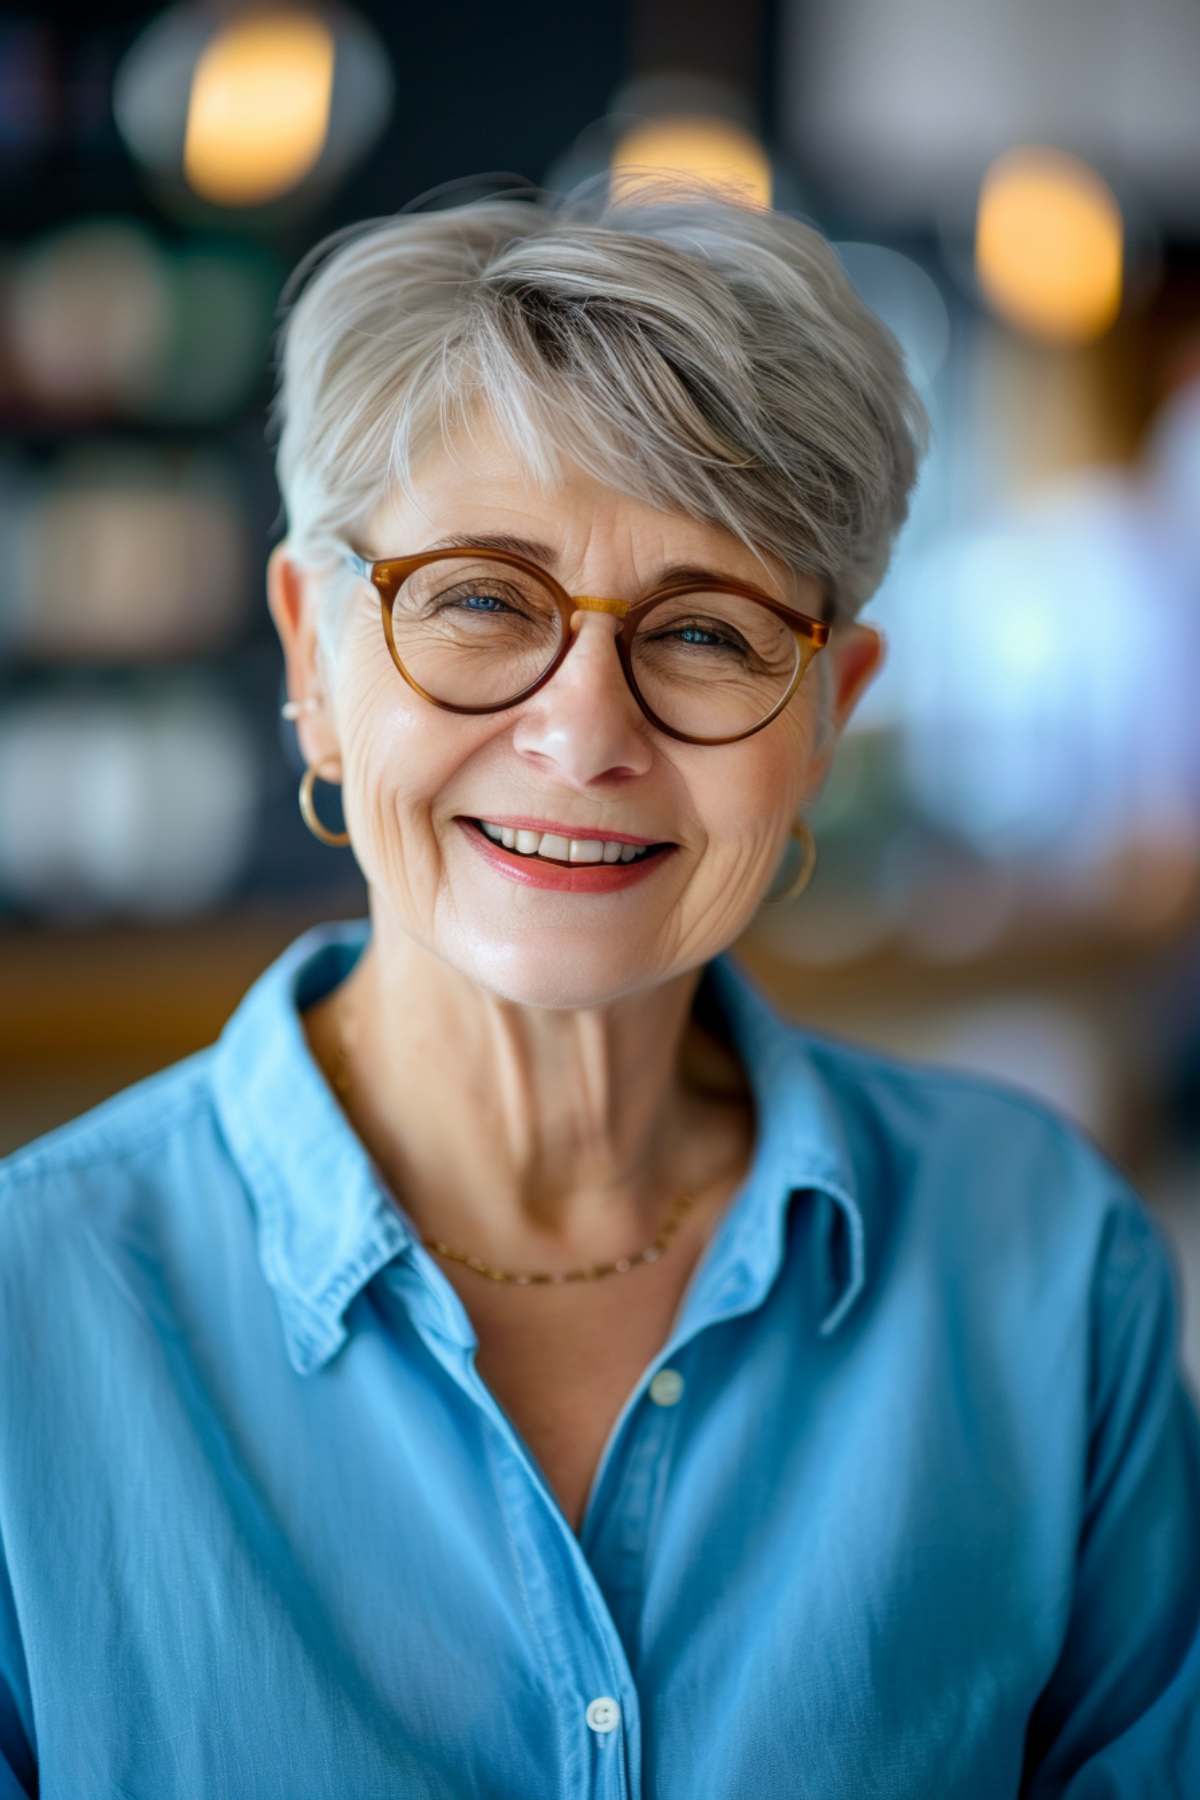 Short grey pixie cut for women over 70 with glasses.